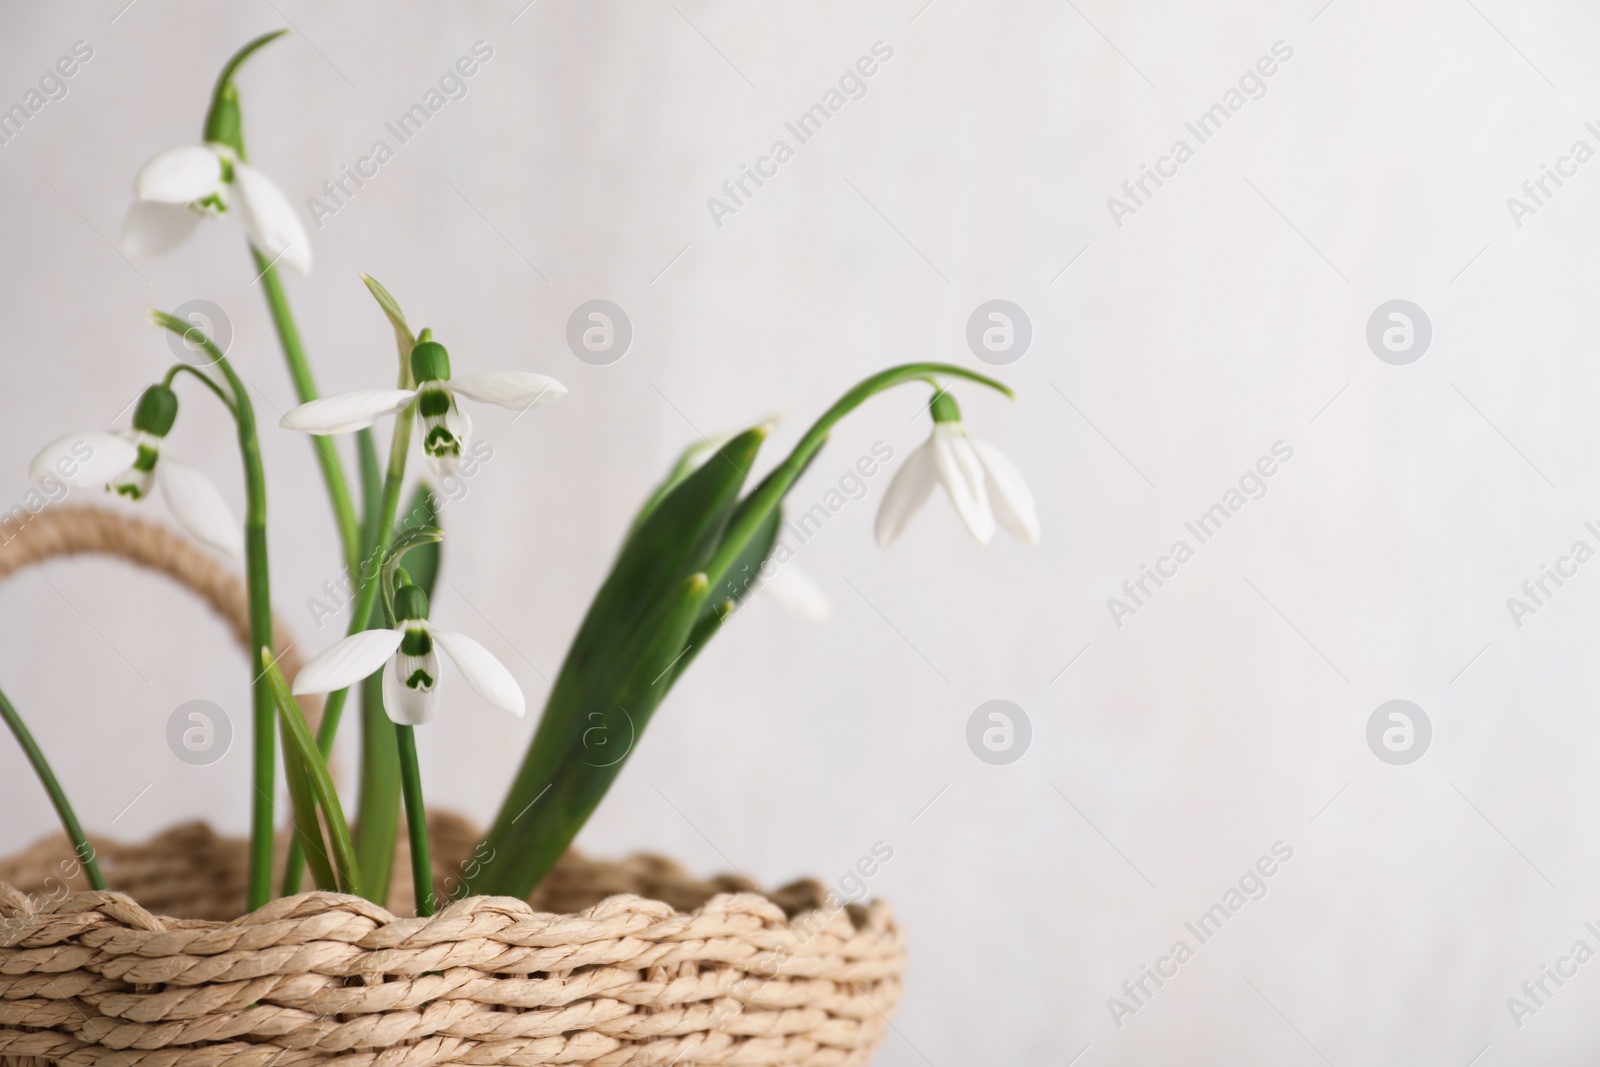 Photo of Beautiful snowdrops in wicker basket against light grey background, closeup